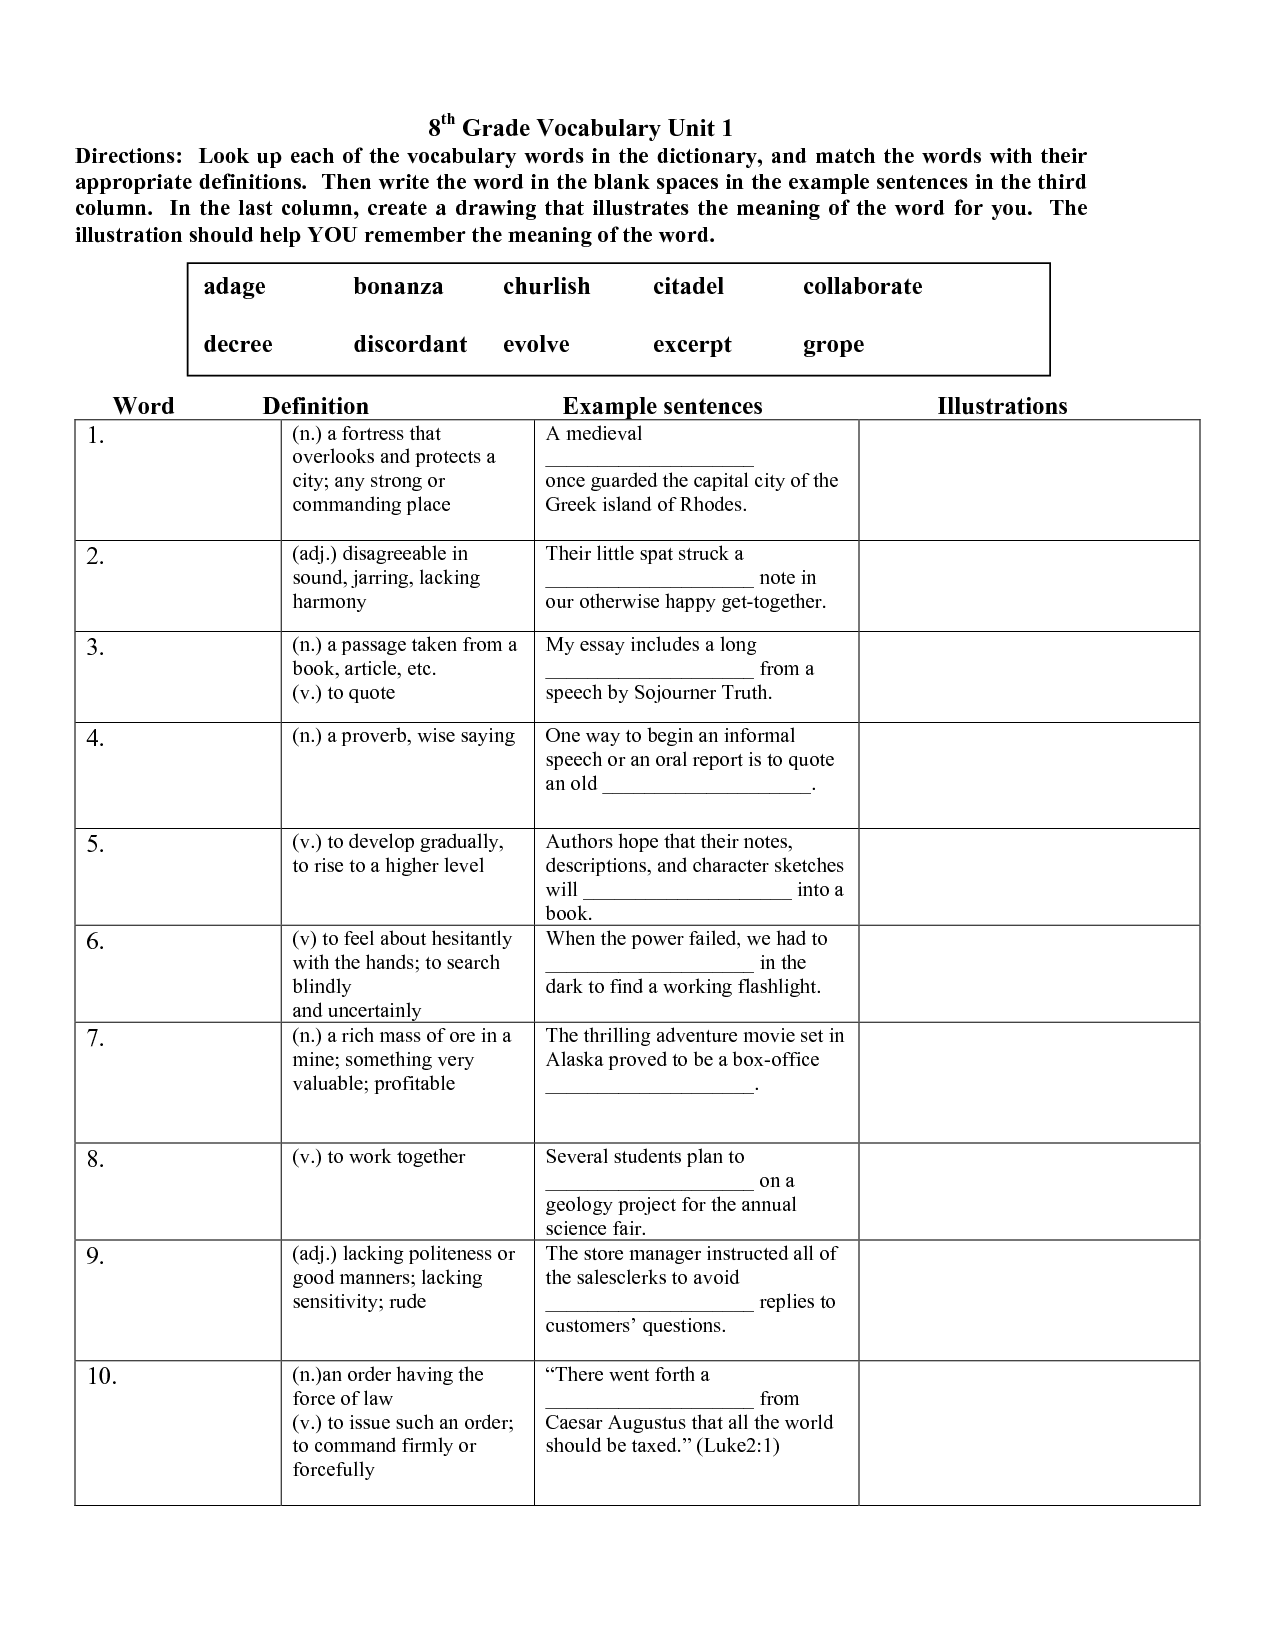 18 Best Images Of 8th Grade Math Vocabulary Worksheets 8th Grade Math Worksheets Printable 